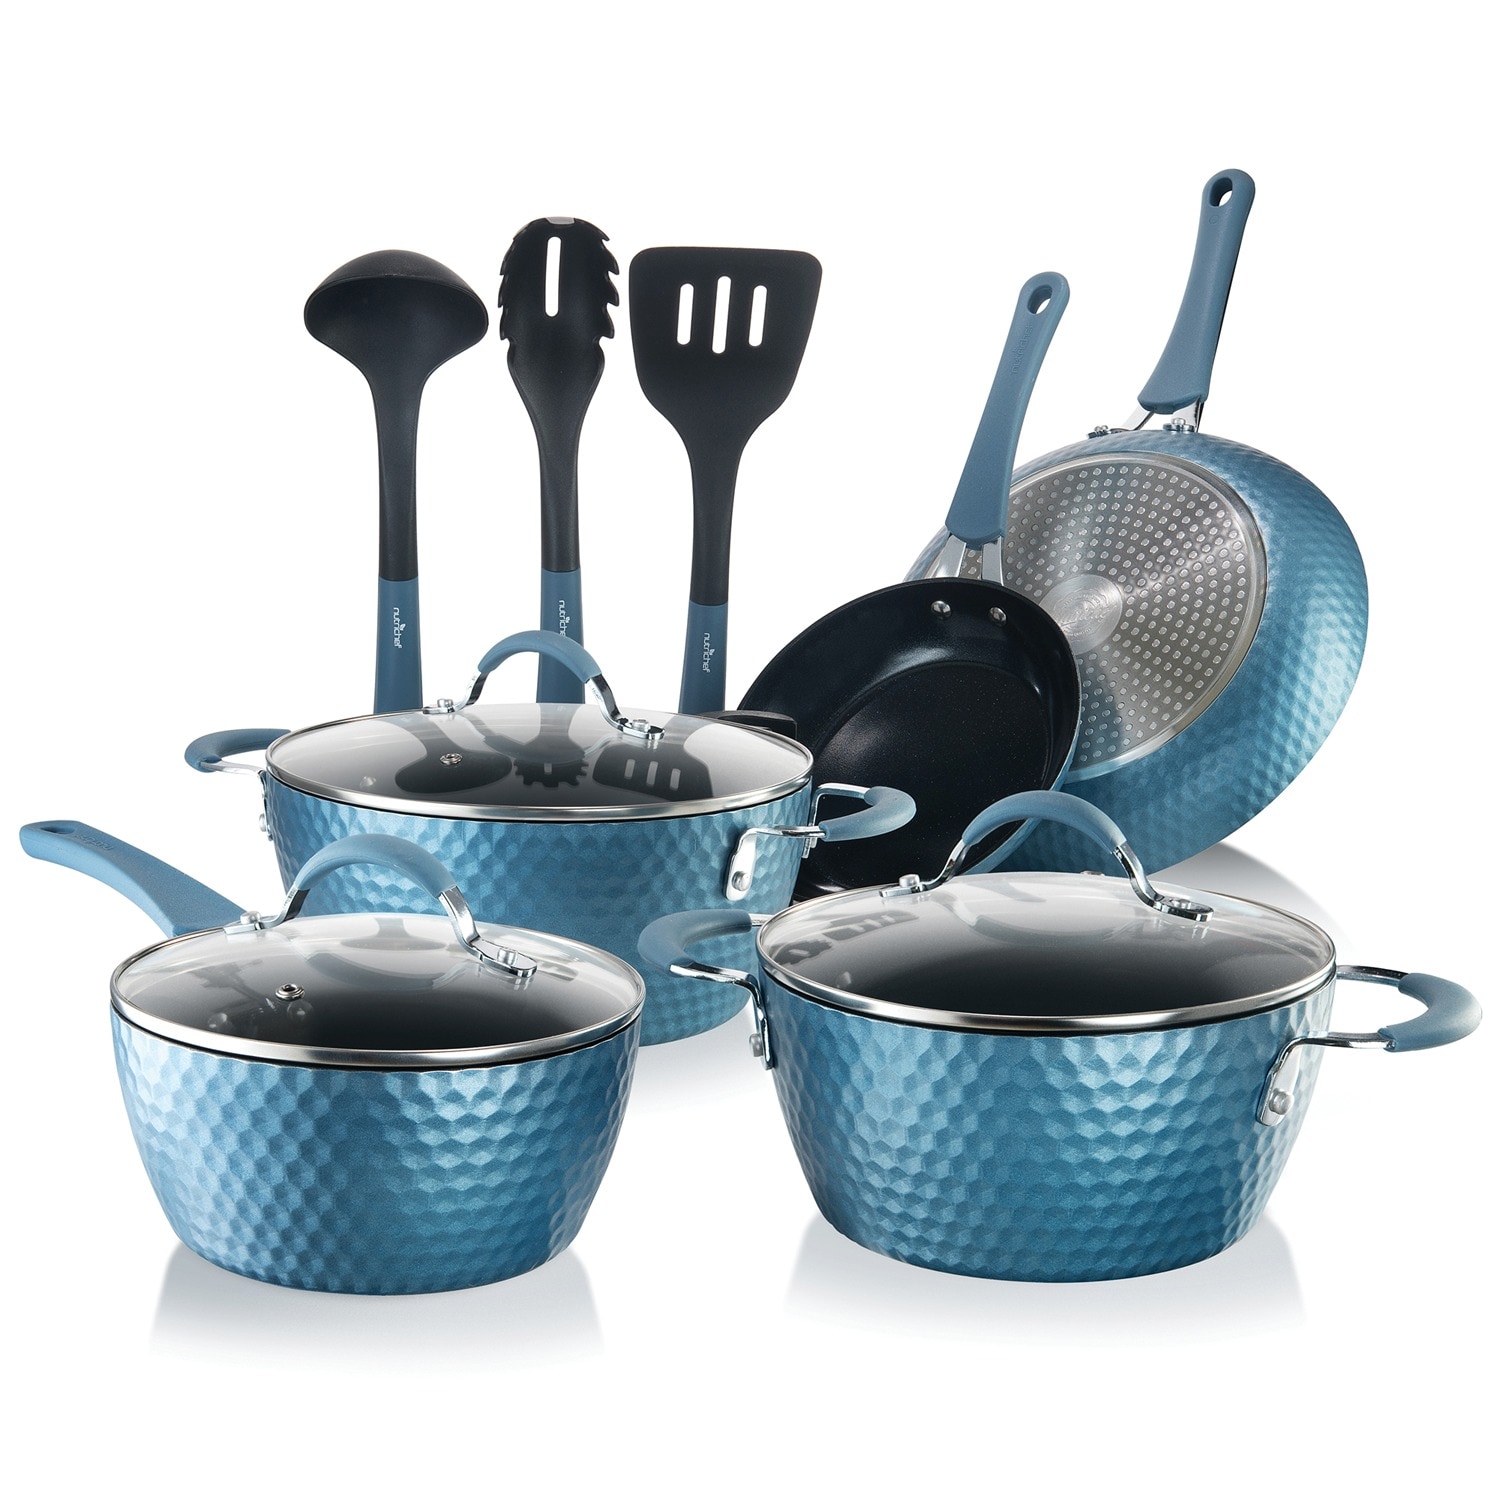 Healthy Non-Toxic Nonstick Cookware Sets - Soft Grip 23-Piece Cookware Set in Blue - by GreenLife